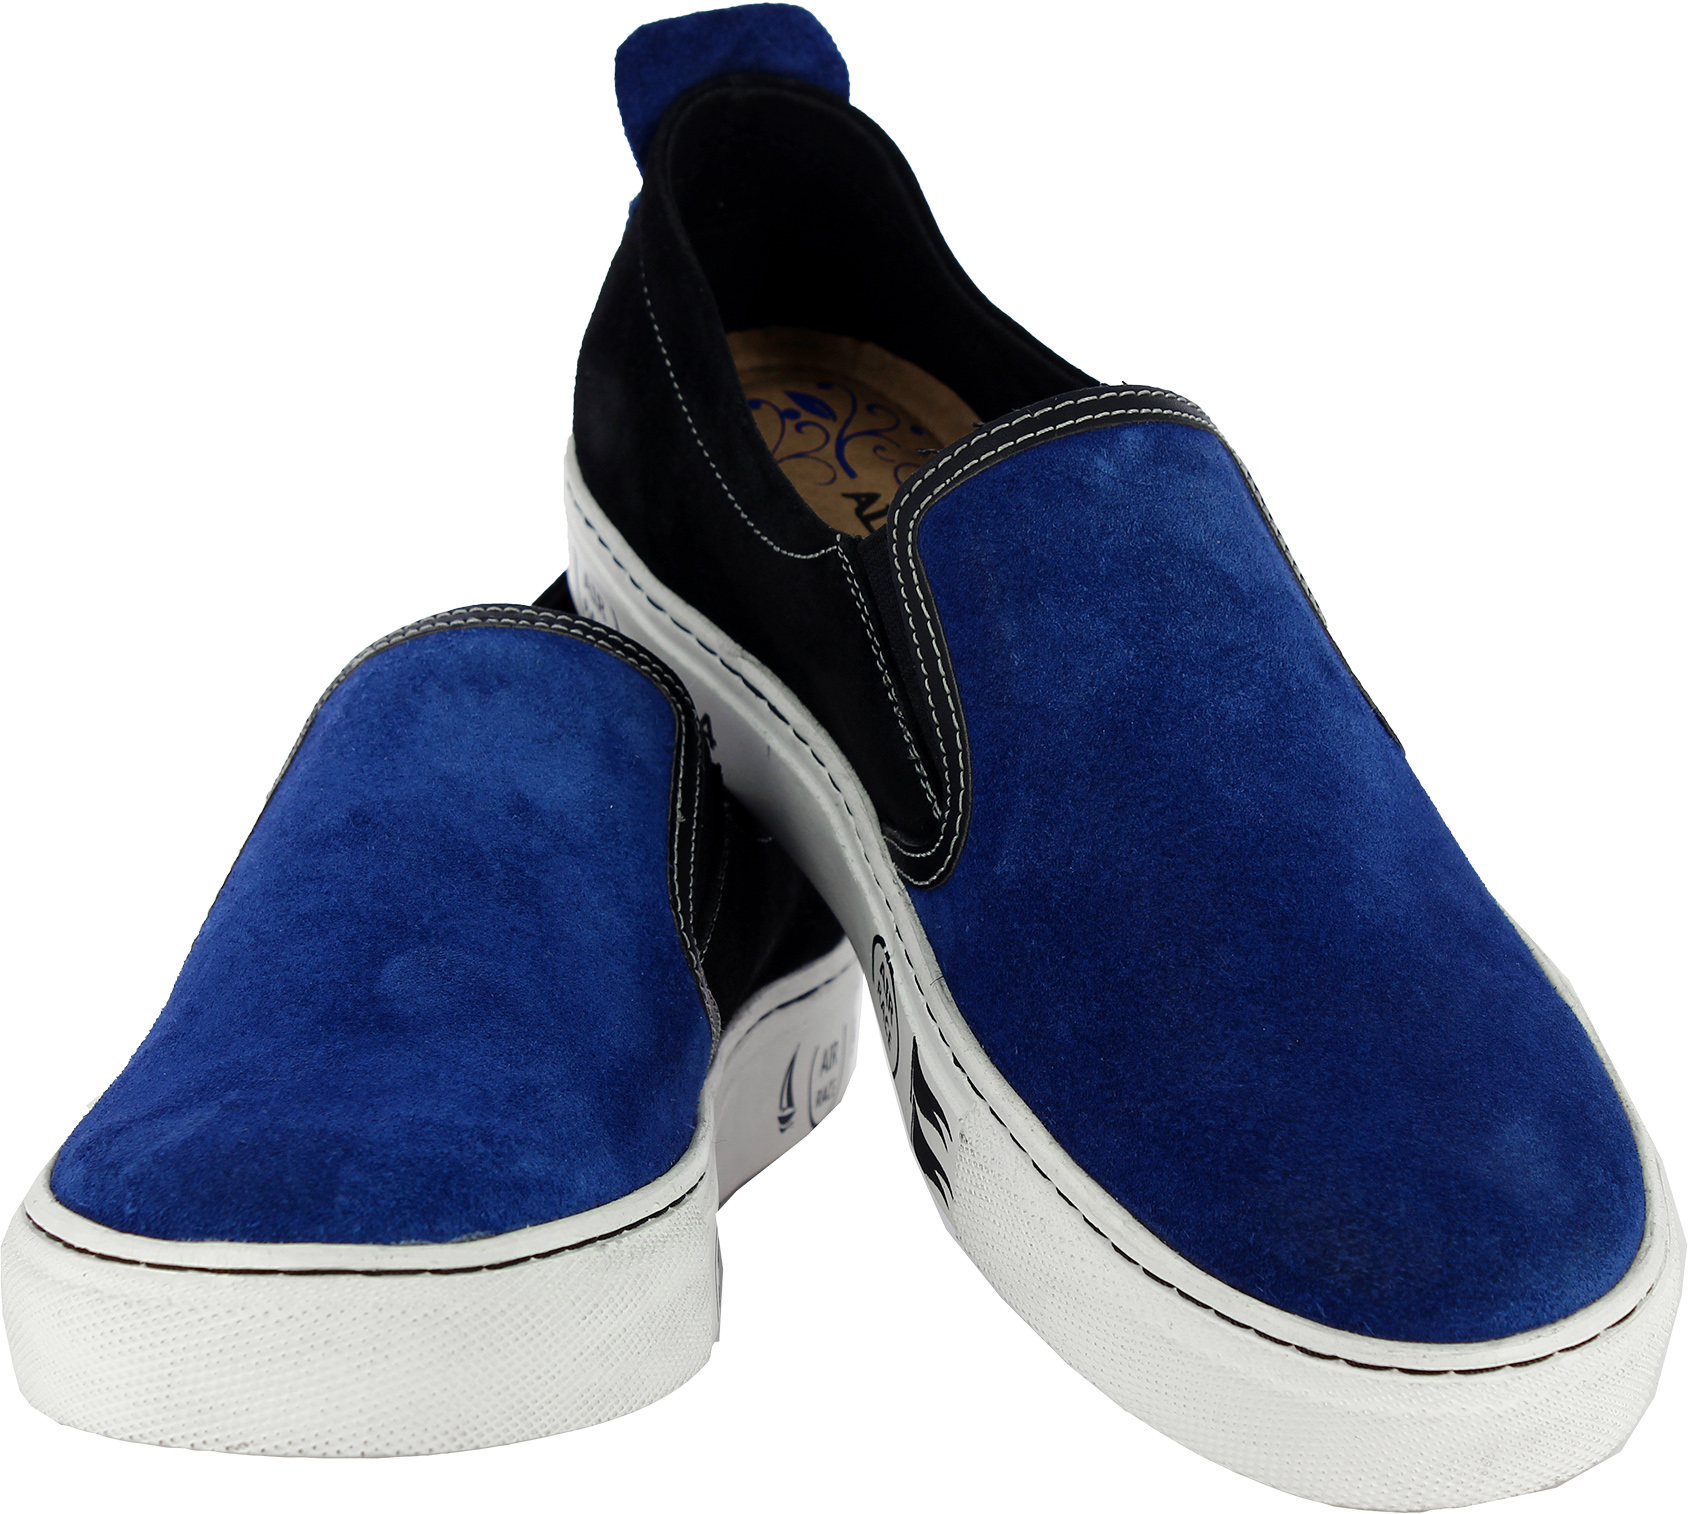 alberto-torresi-andalucia-blue-casual-shoes-price-rs-2195